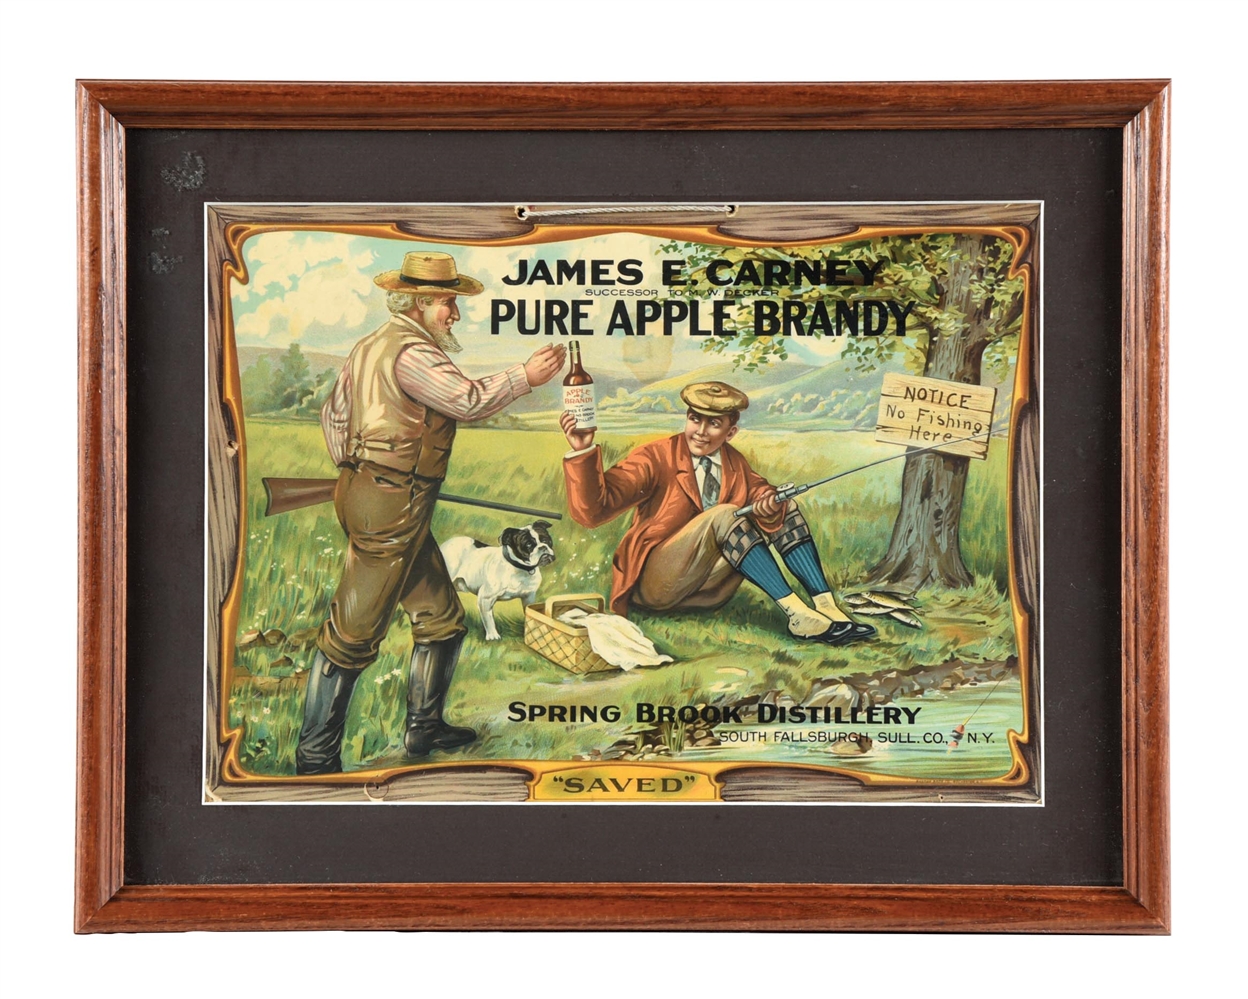 JAMES E. CARNEY PURE APPLE BRANDY CELLULOID OVER CARDBOARD SIGN W/ HUNTING & FISHING GRAPHIC